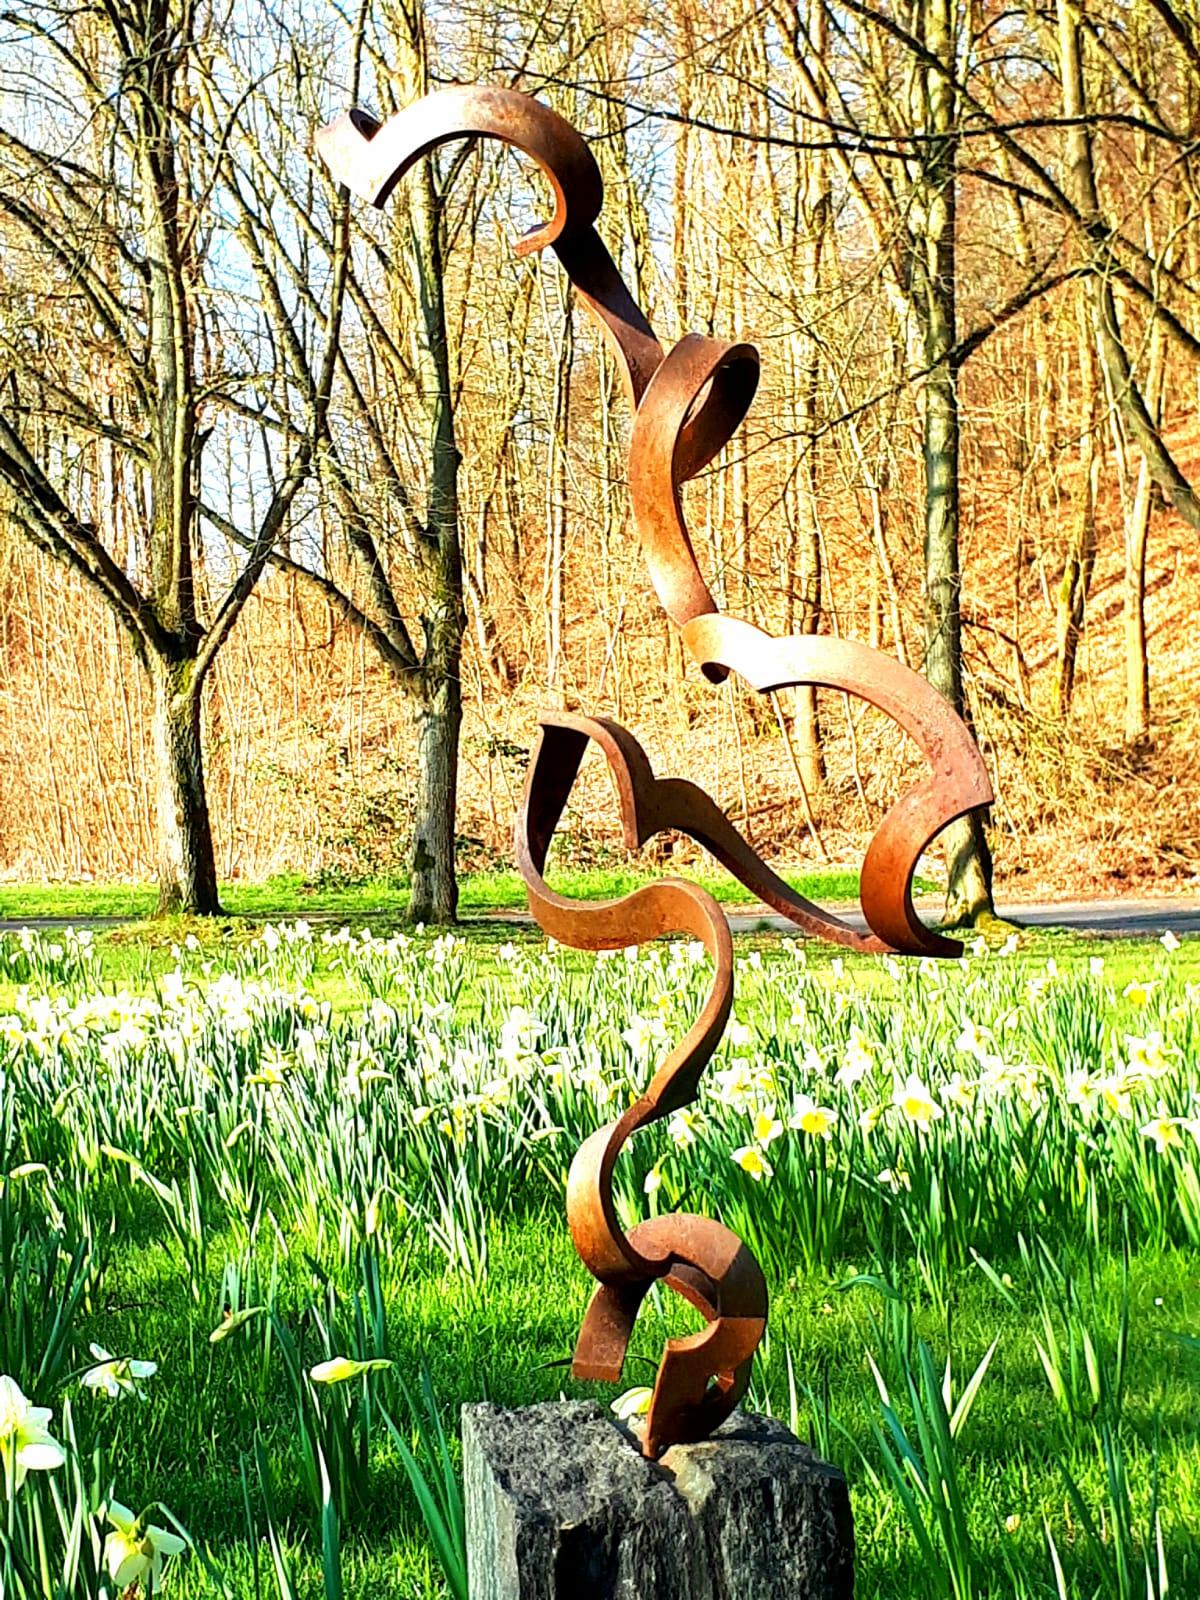 Dancing Spiral by Kuno Vollet - Contemporary Rusted Steel sculpture for Outdoors 2